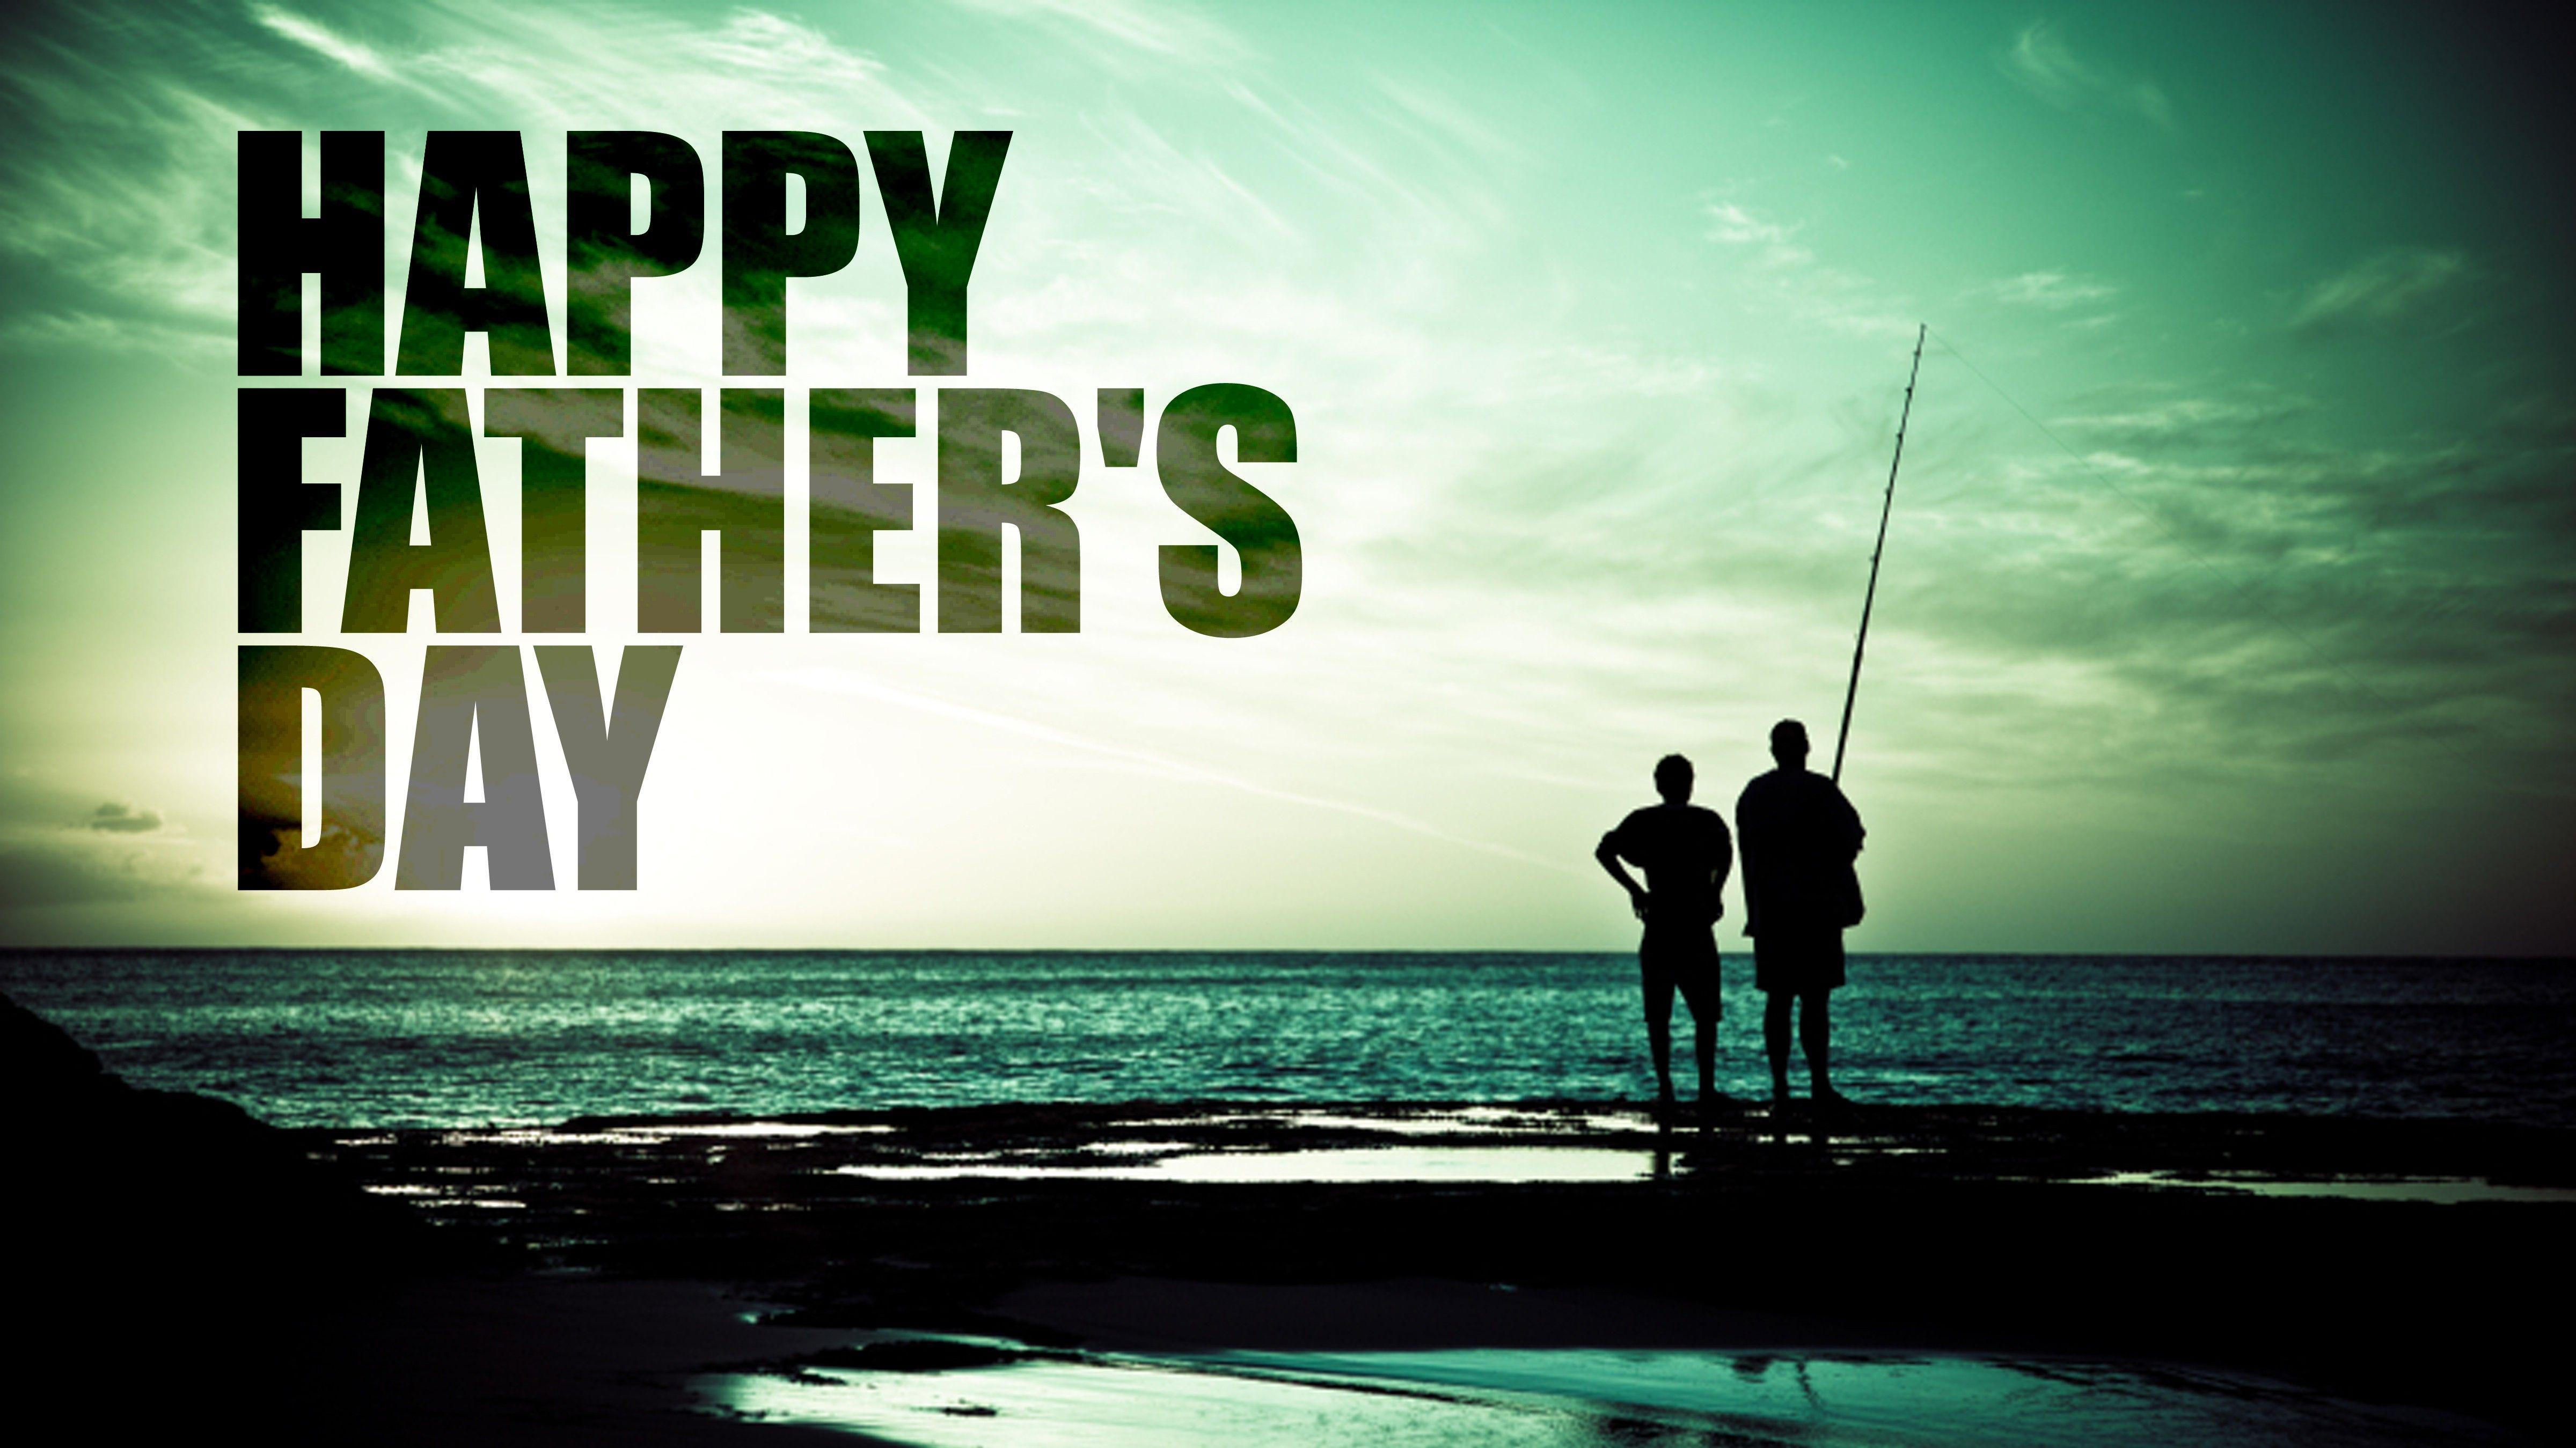 Happy Fathers Day Greetings Wishes Wallpaper HD